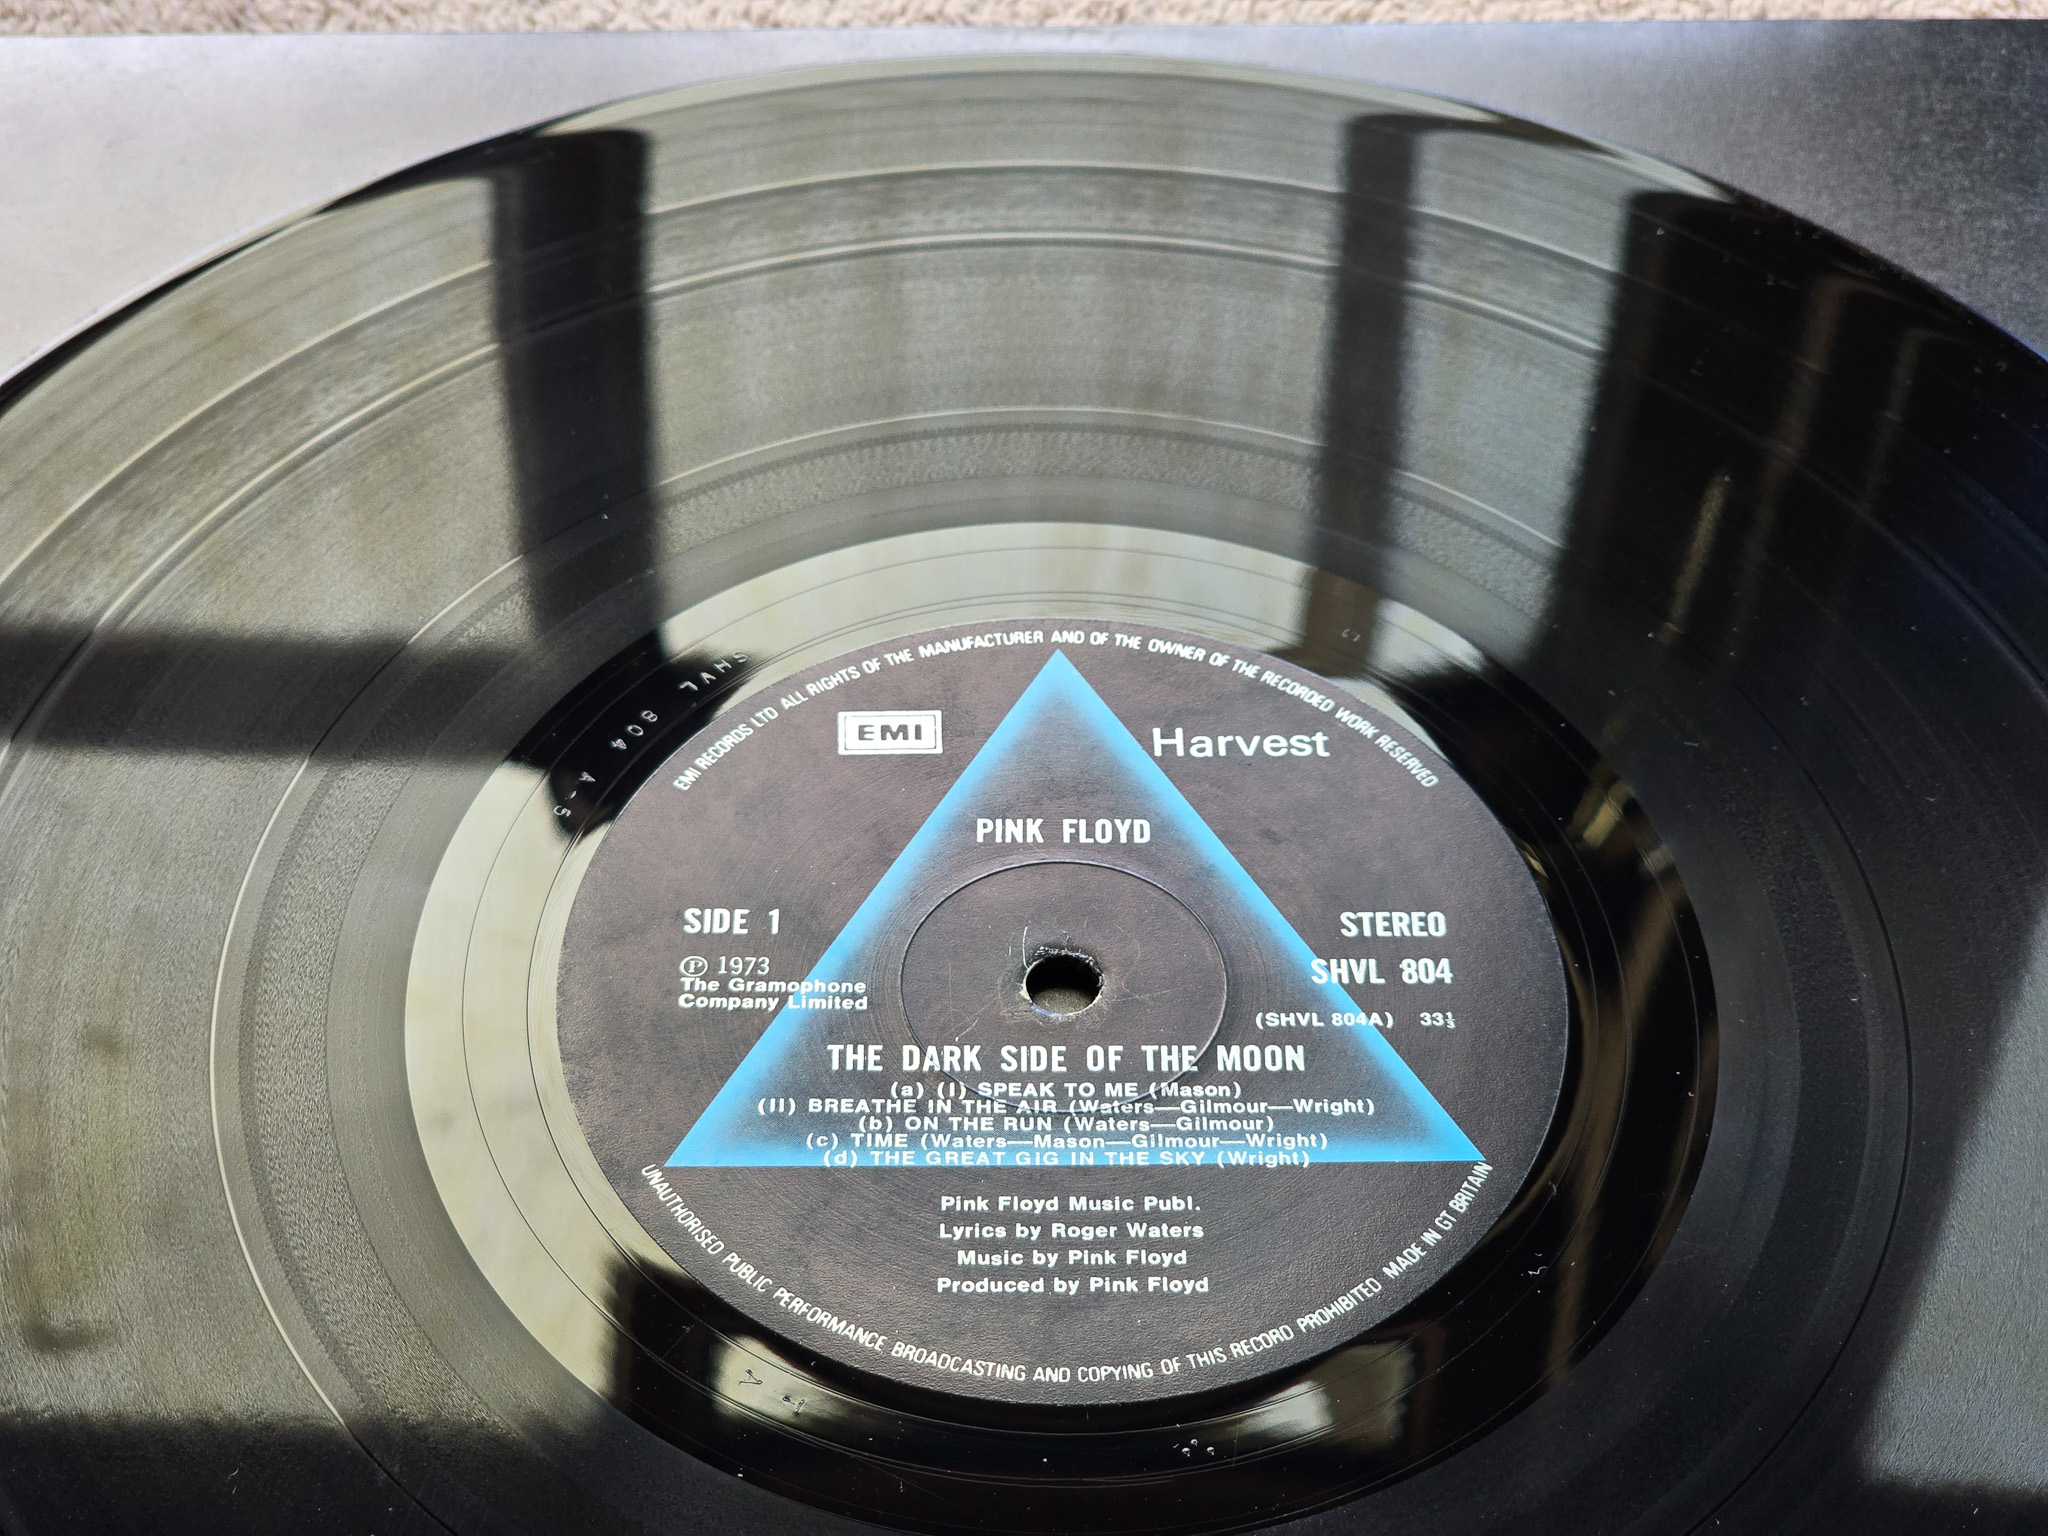 Pink Floyd – The Dark Side Of The Moon early UK Vinyl LP + 2 Posters & Sticker - Image 6 of 11